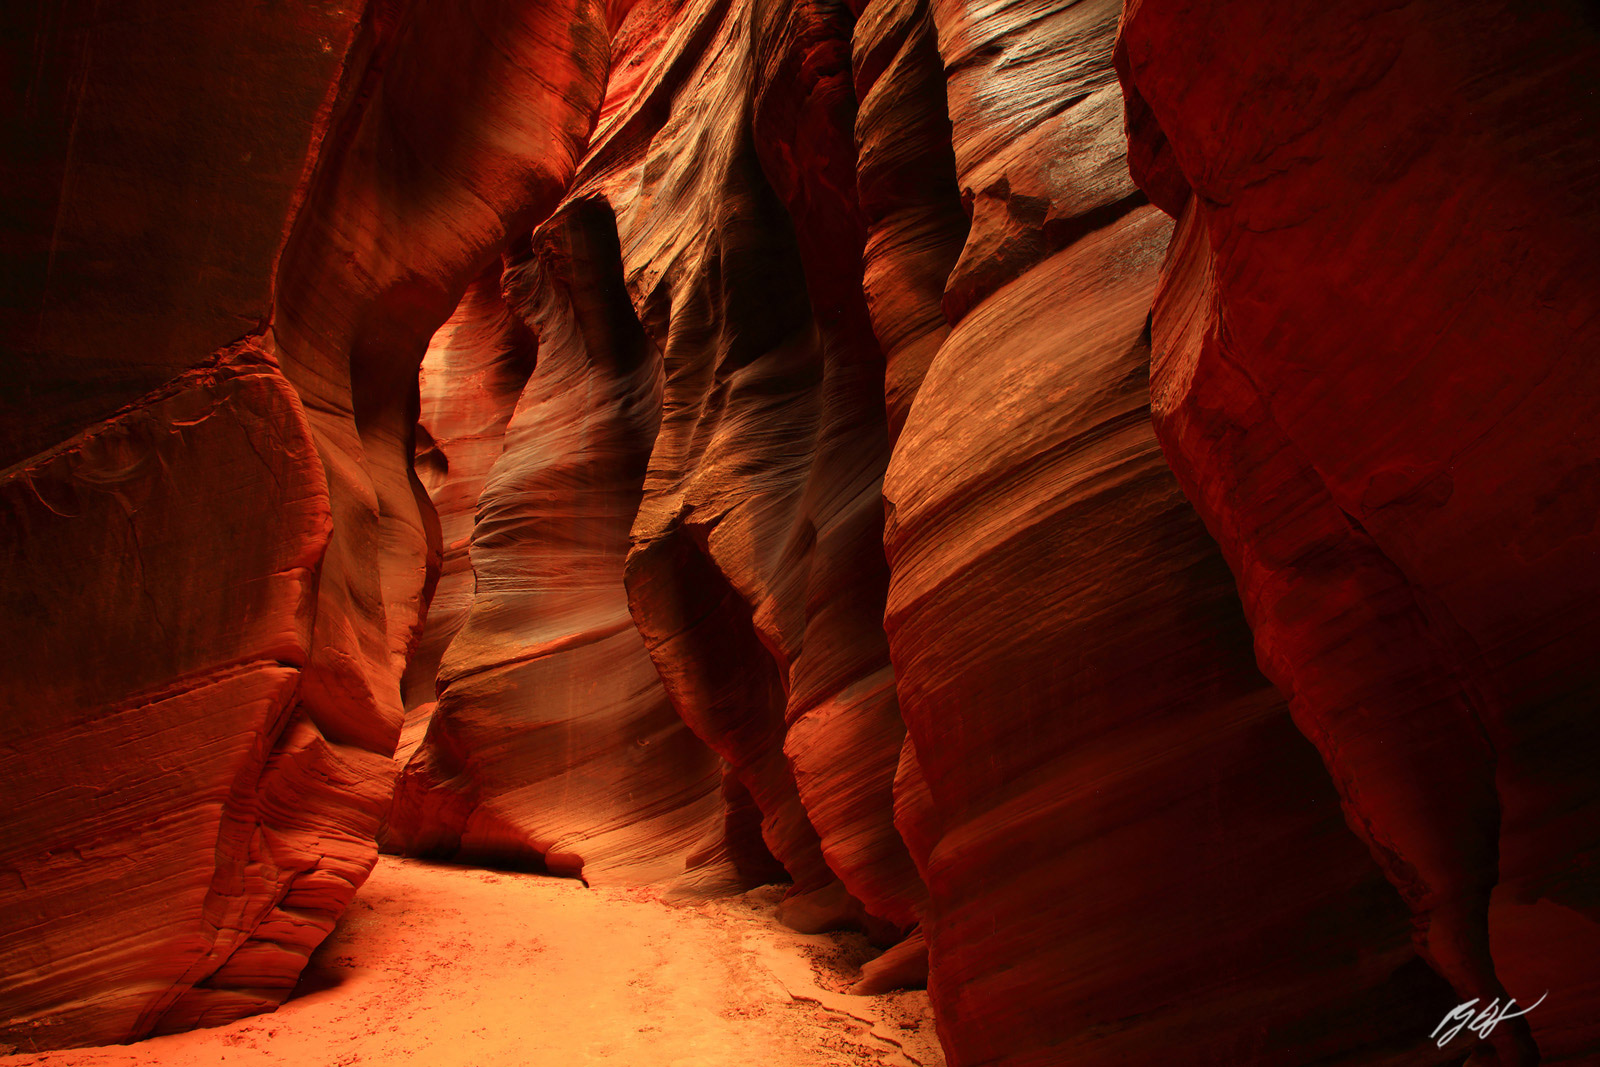 Deep in Buckskin Gulch, one of the longest and tallest slot canyons in the world, in the Vermillion Cliffs Wilderness in Utah